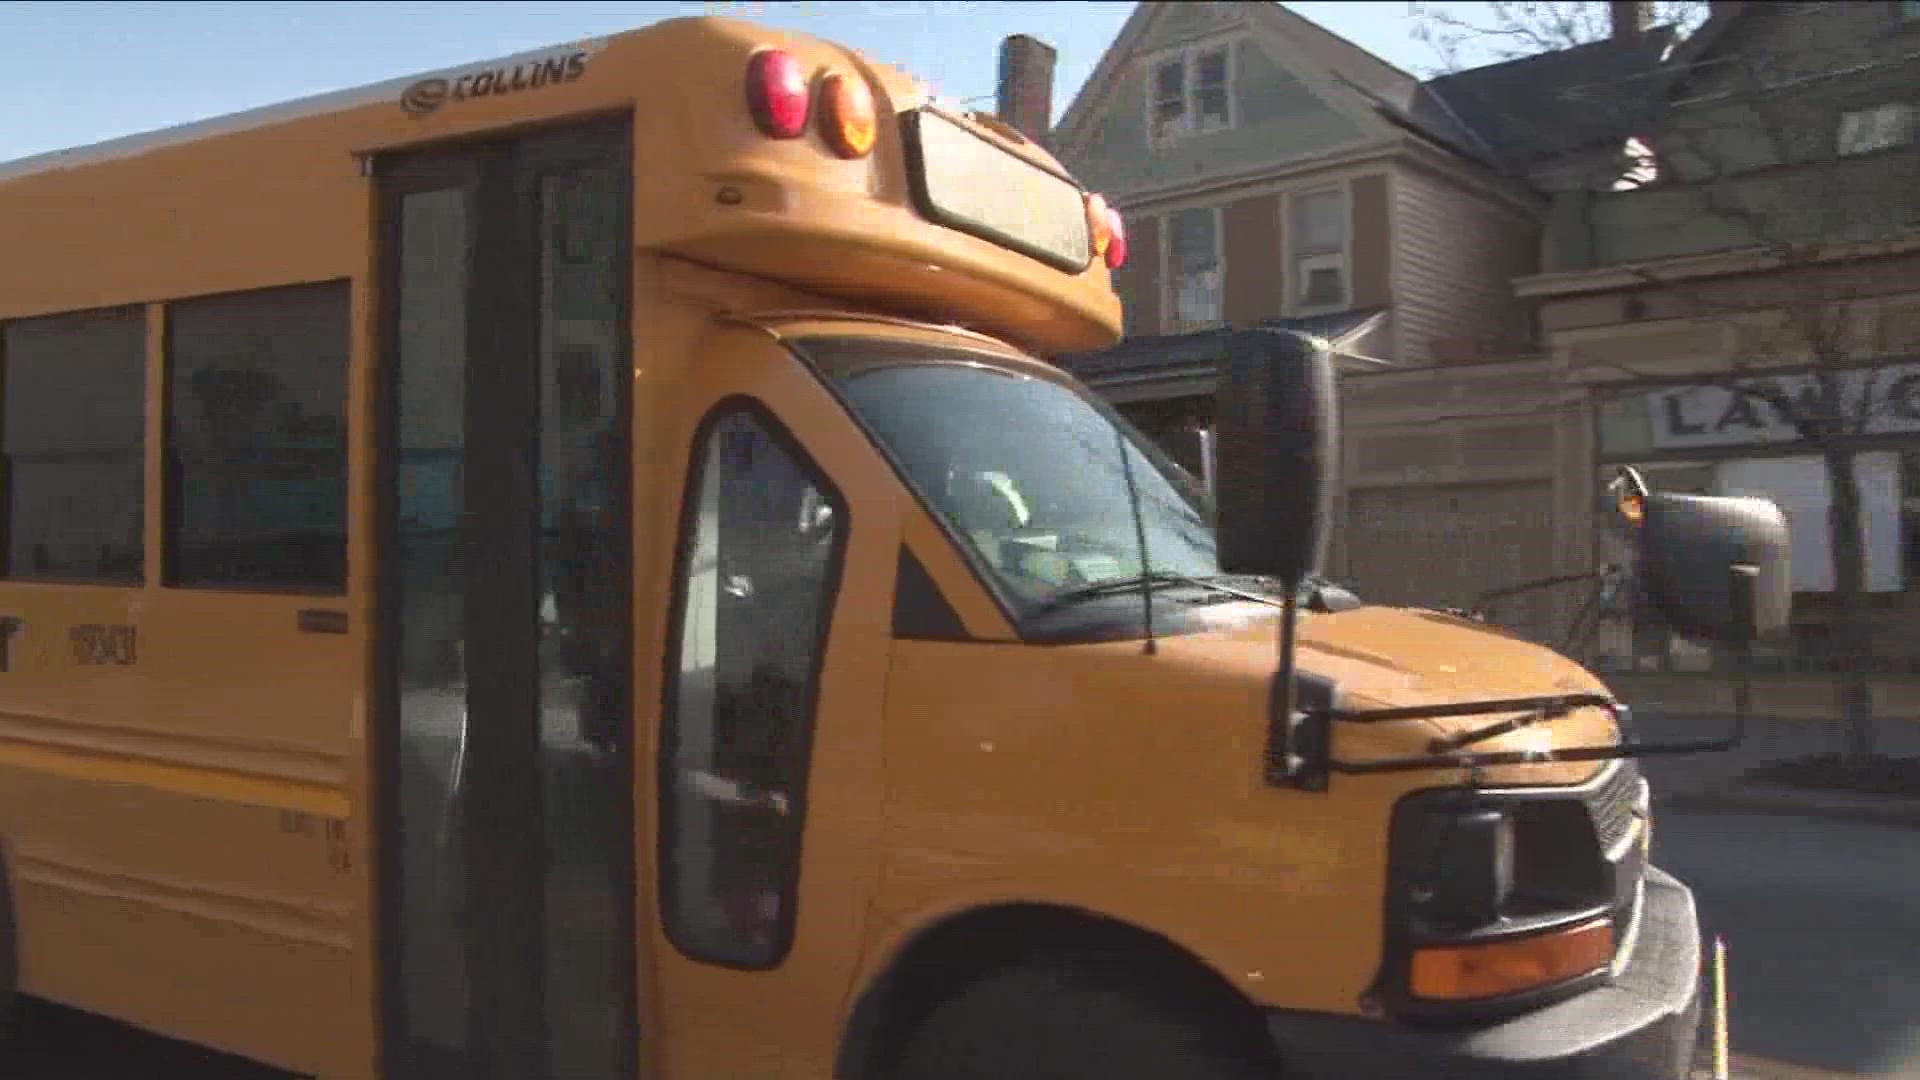 New Information on reimbursement for parents driving their child to school